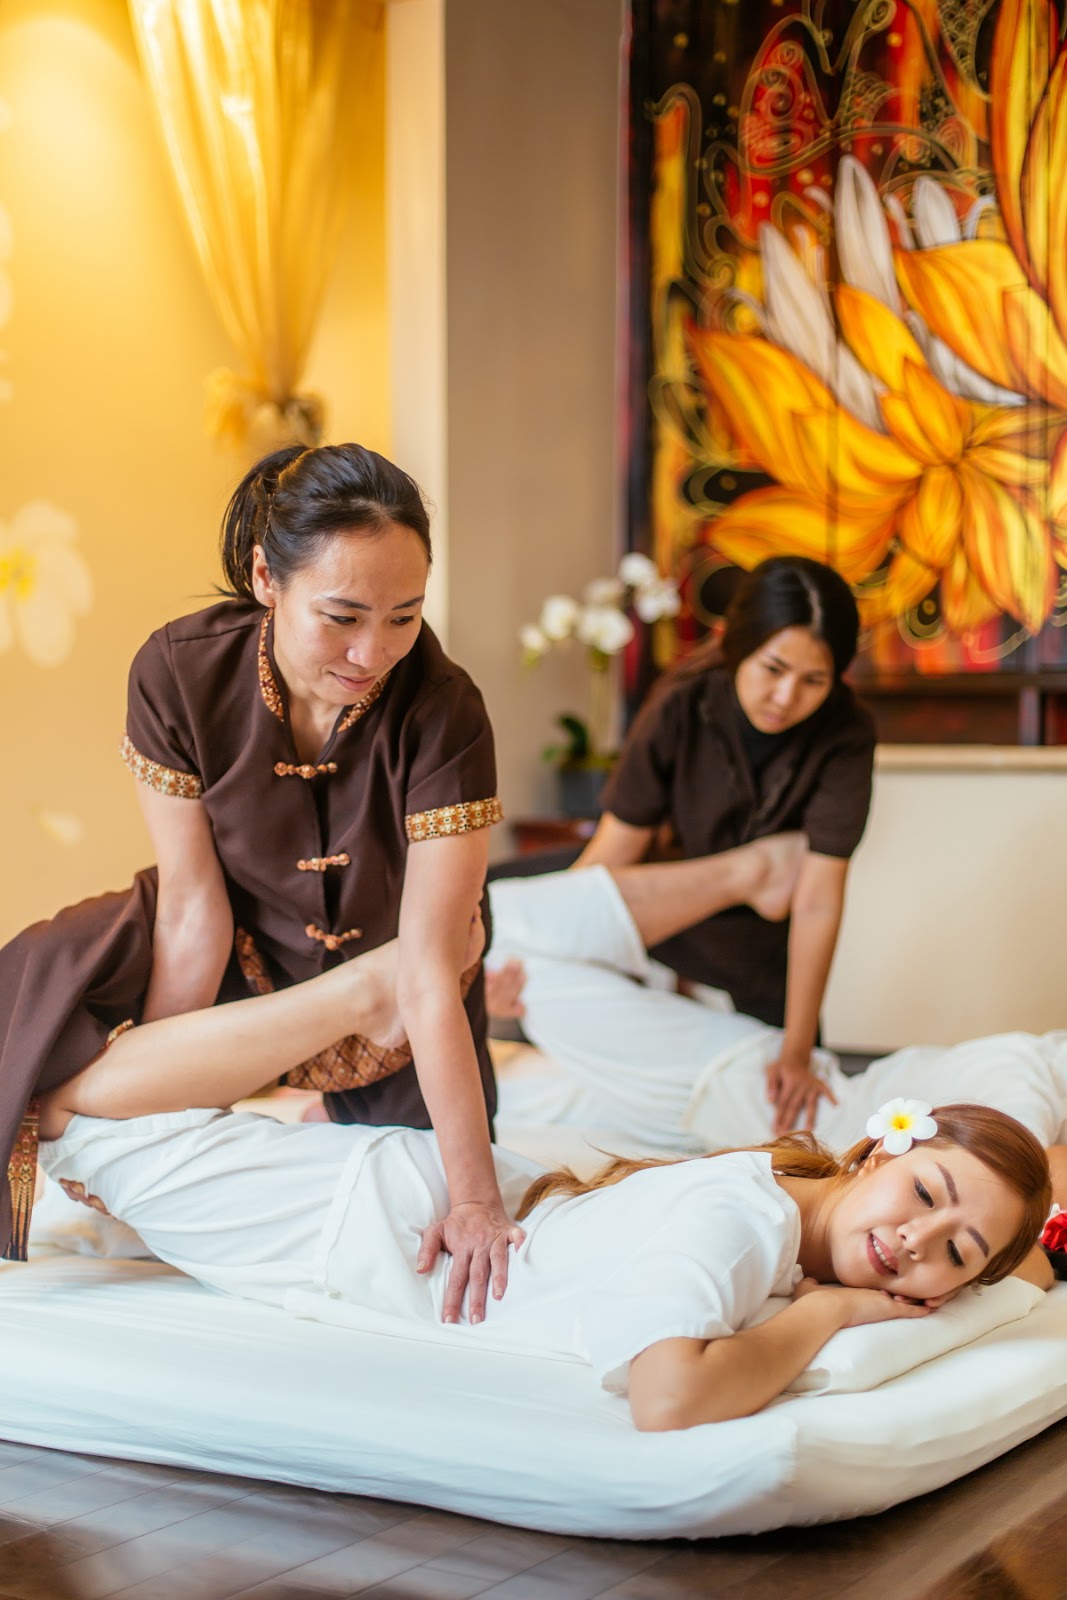 World Class Thai Spa In New York With The Best Treatmentfifth Ave Thai